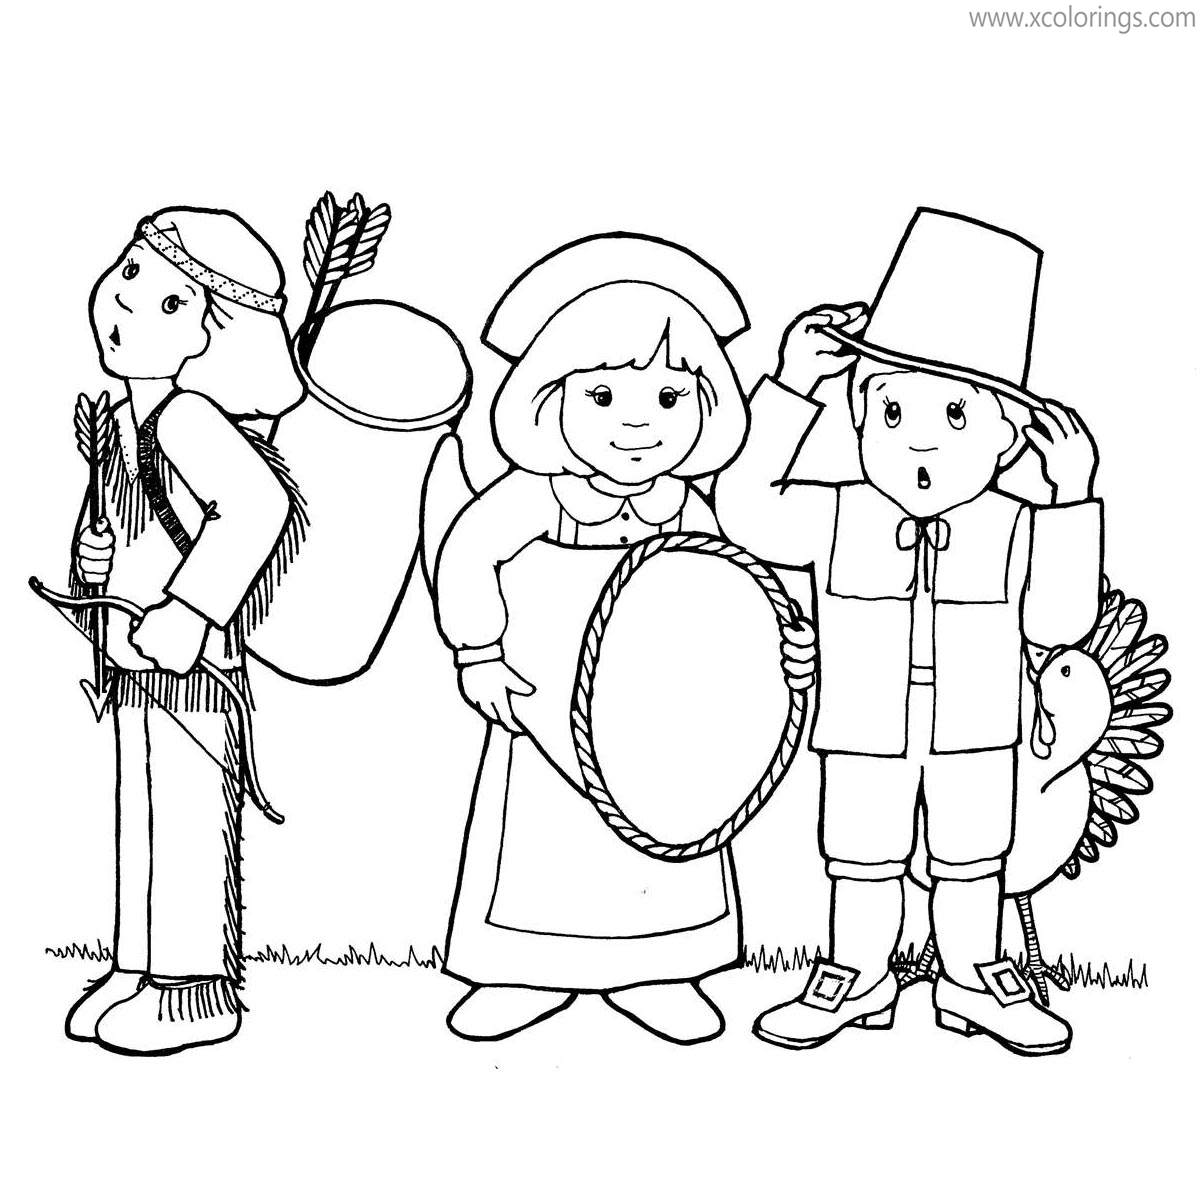 Free Pilgrim Coloring Pages Boy and Girl of Thanksgiving printable